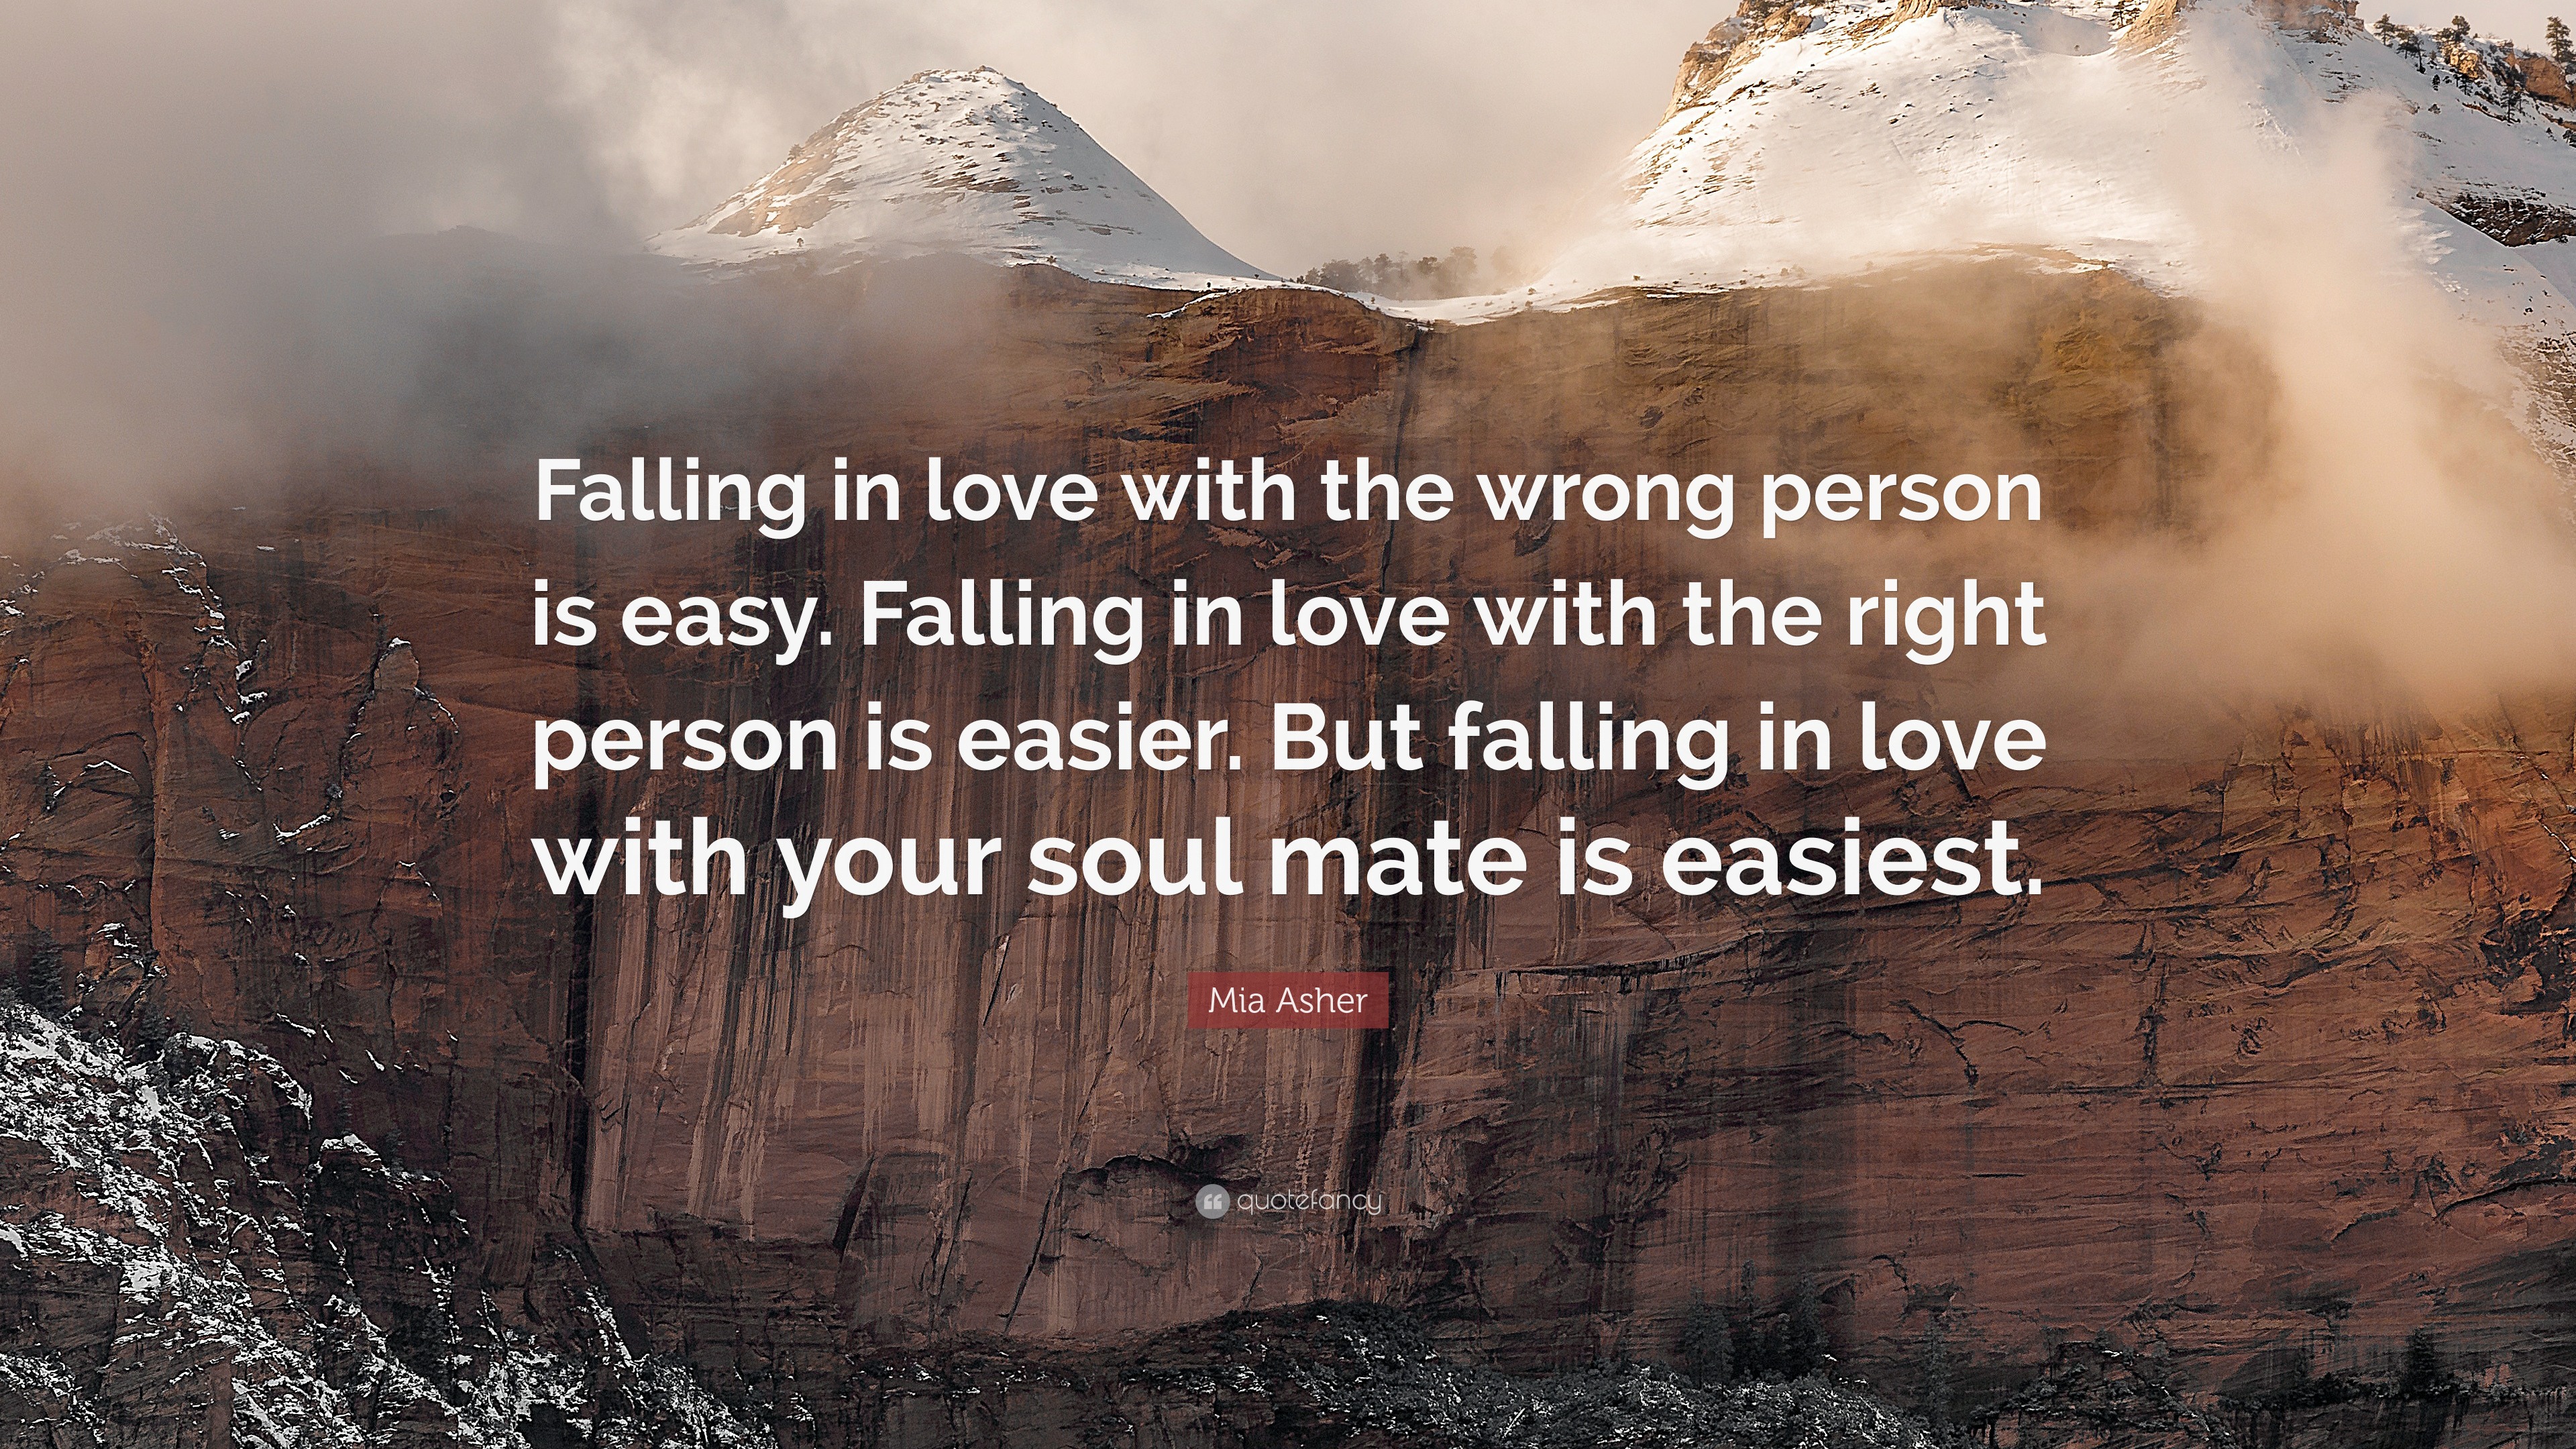 Mia Asher Quote “Falling in love with the wrong person is easy Falling